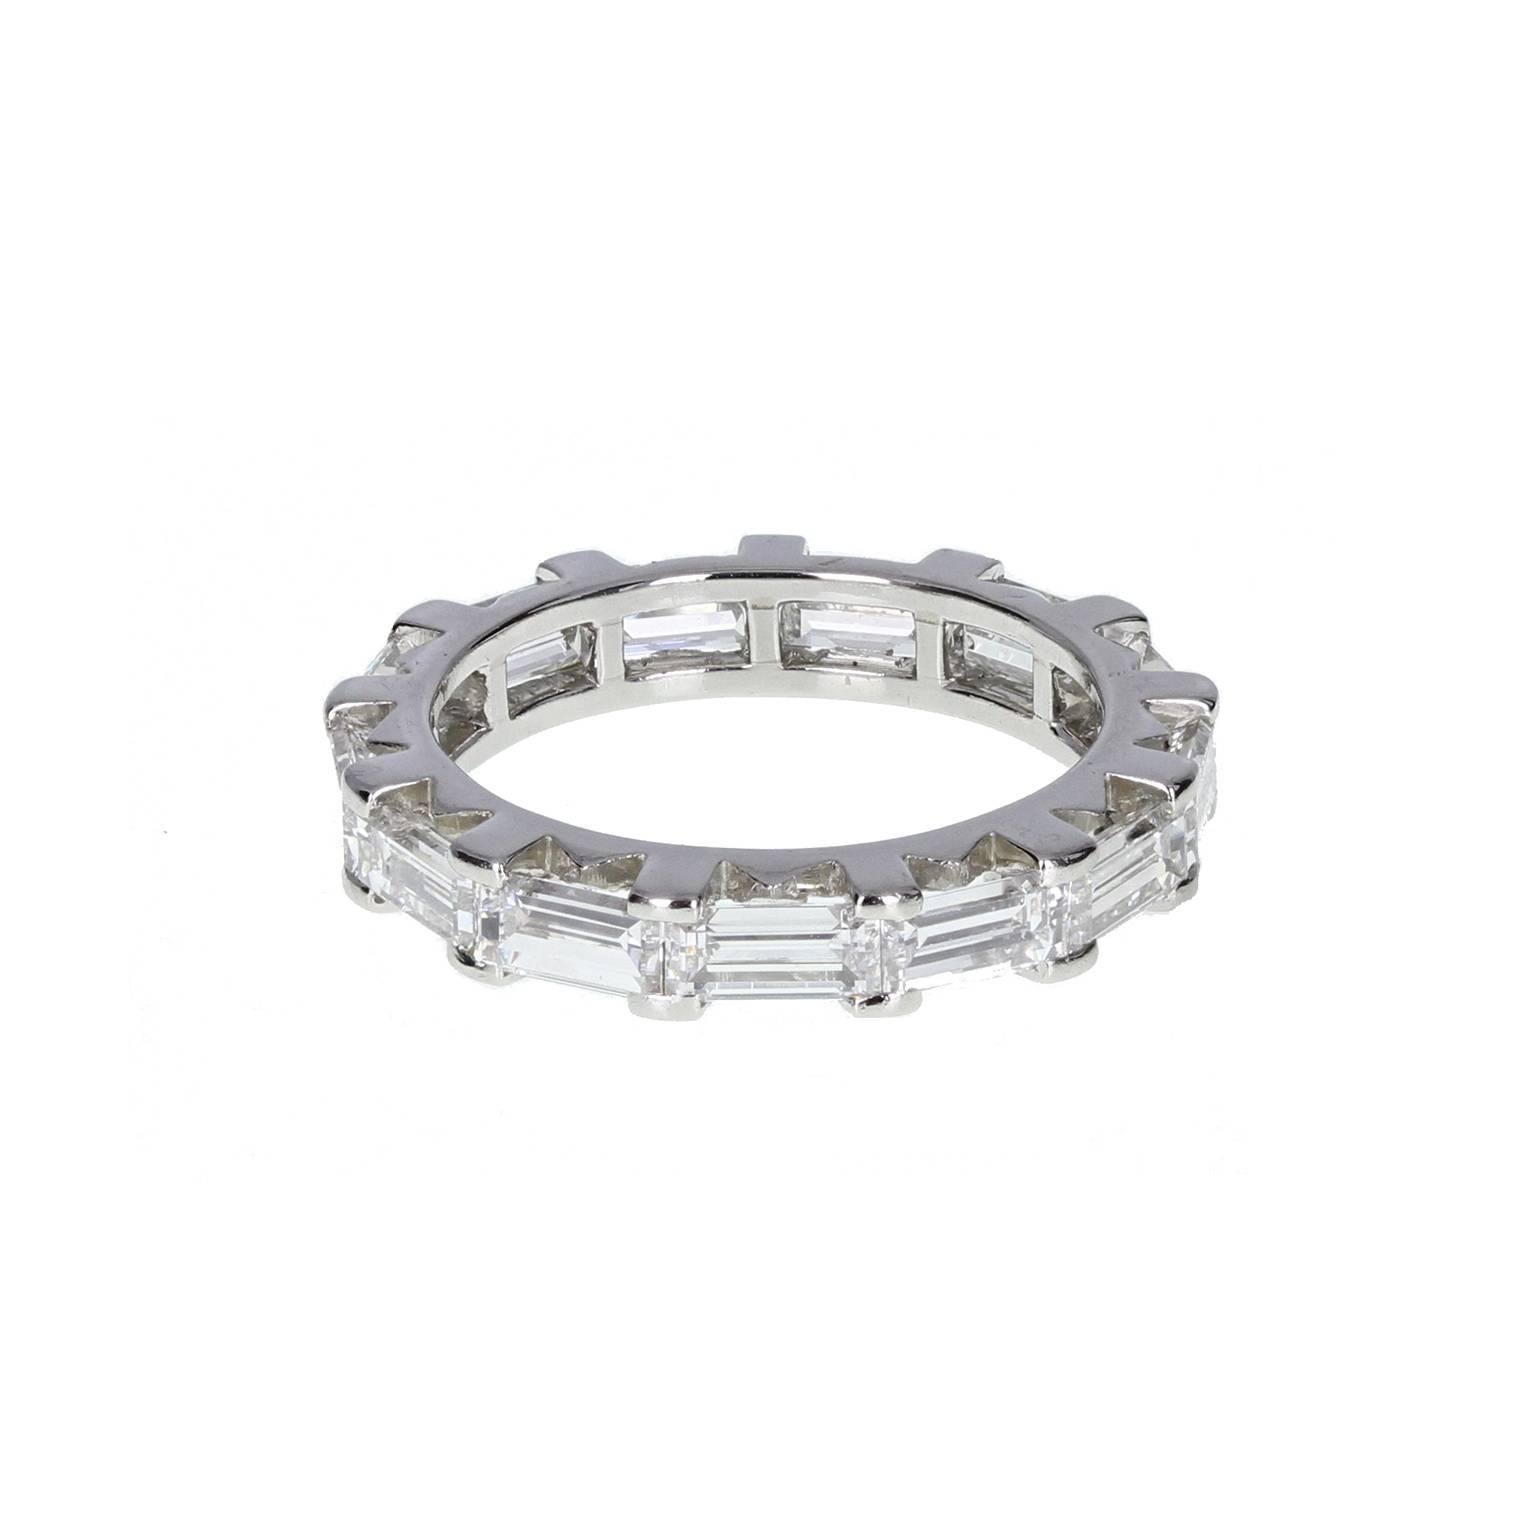  From arguably the finest name in jewellery, this exquisite full-hoop eternity ring is crafted to the highest standard. A full platinum hoop mounted with 13 very well matched baguette-cut diamonds in perfectly spaced claws. Signed 'Cartier Paris'.